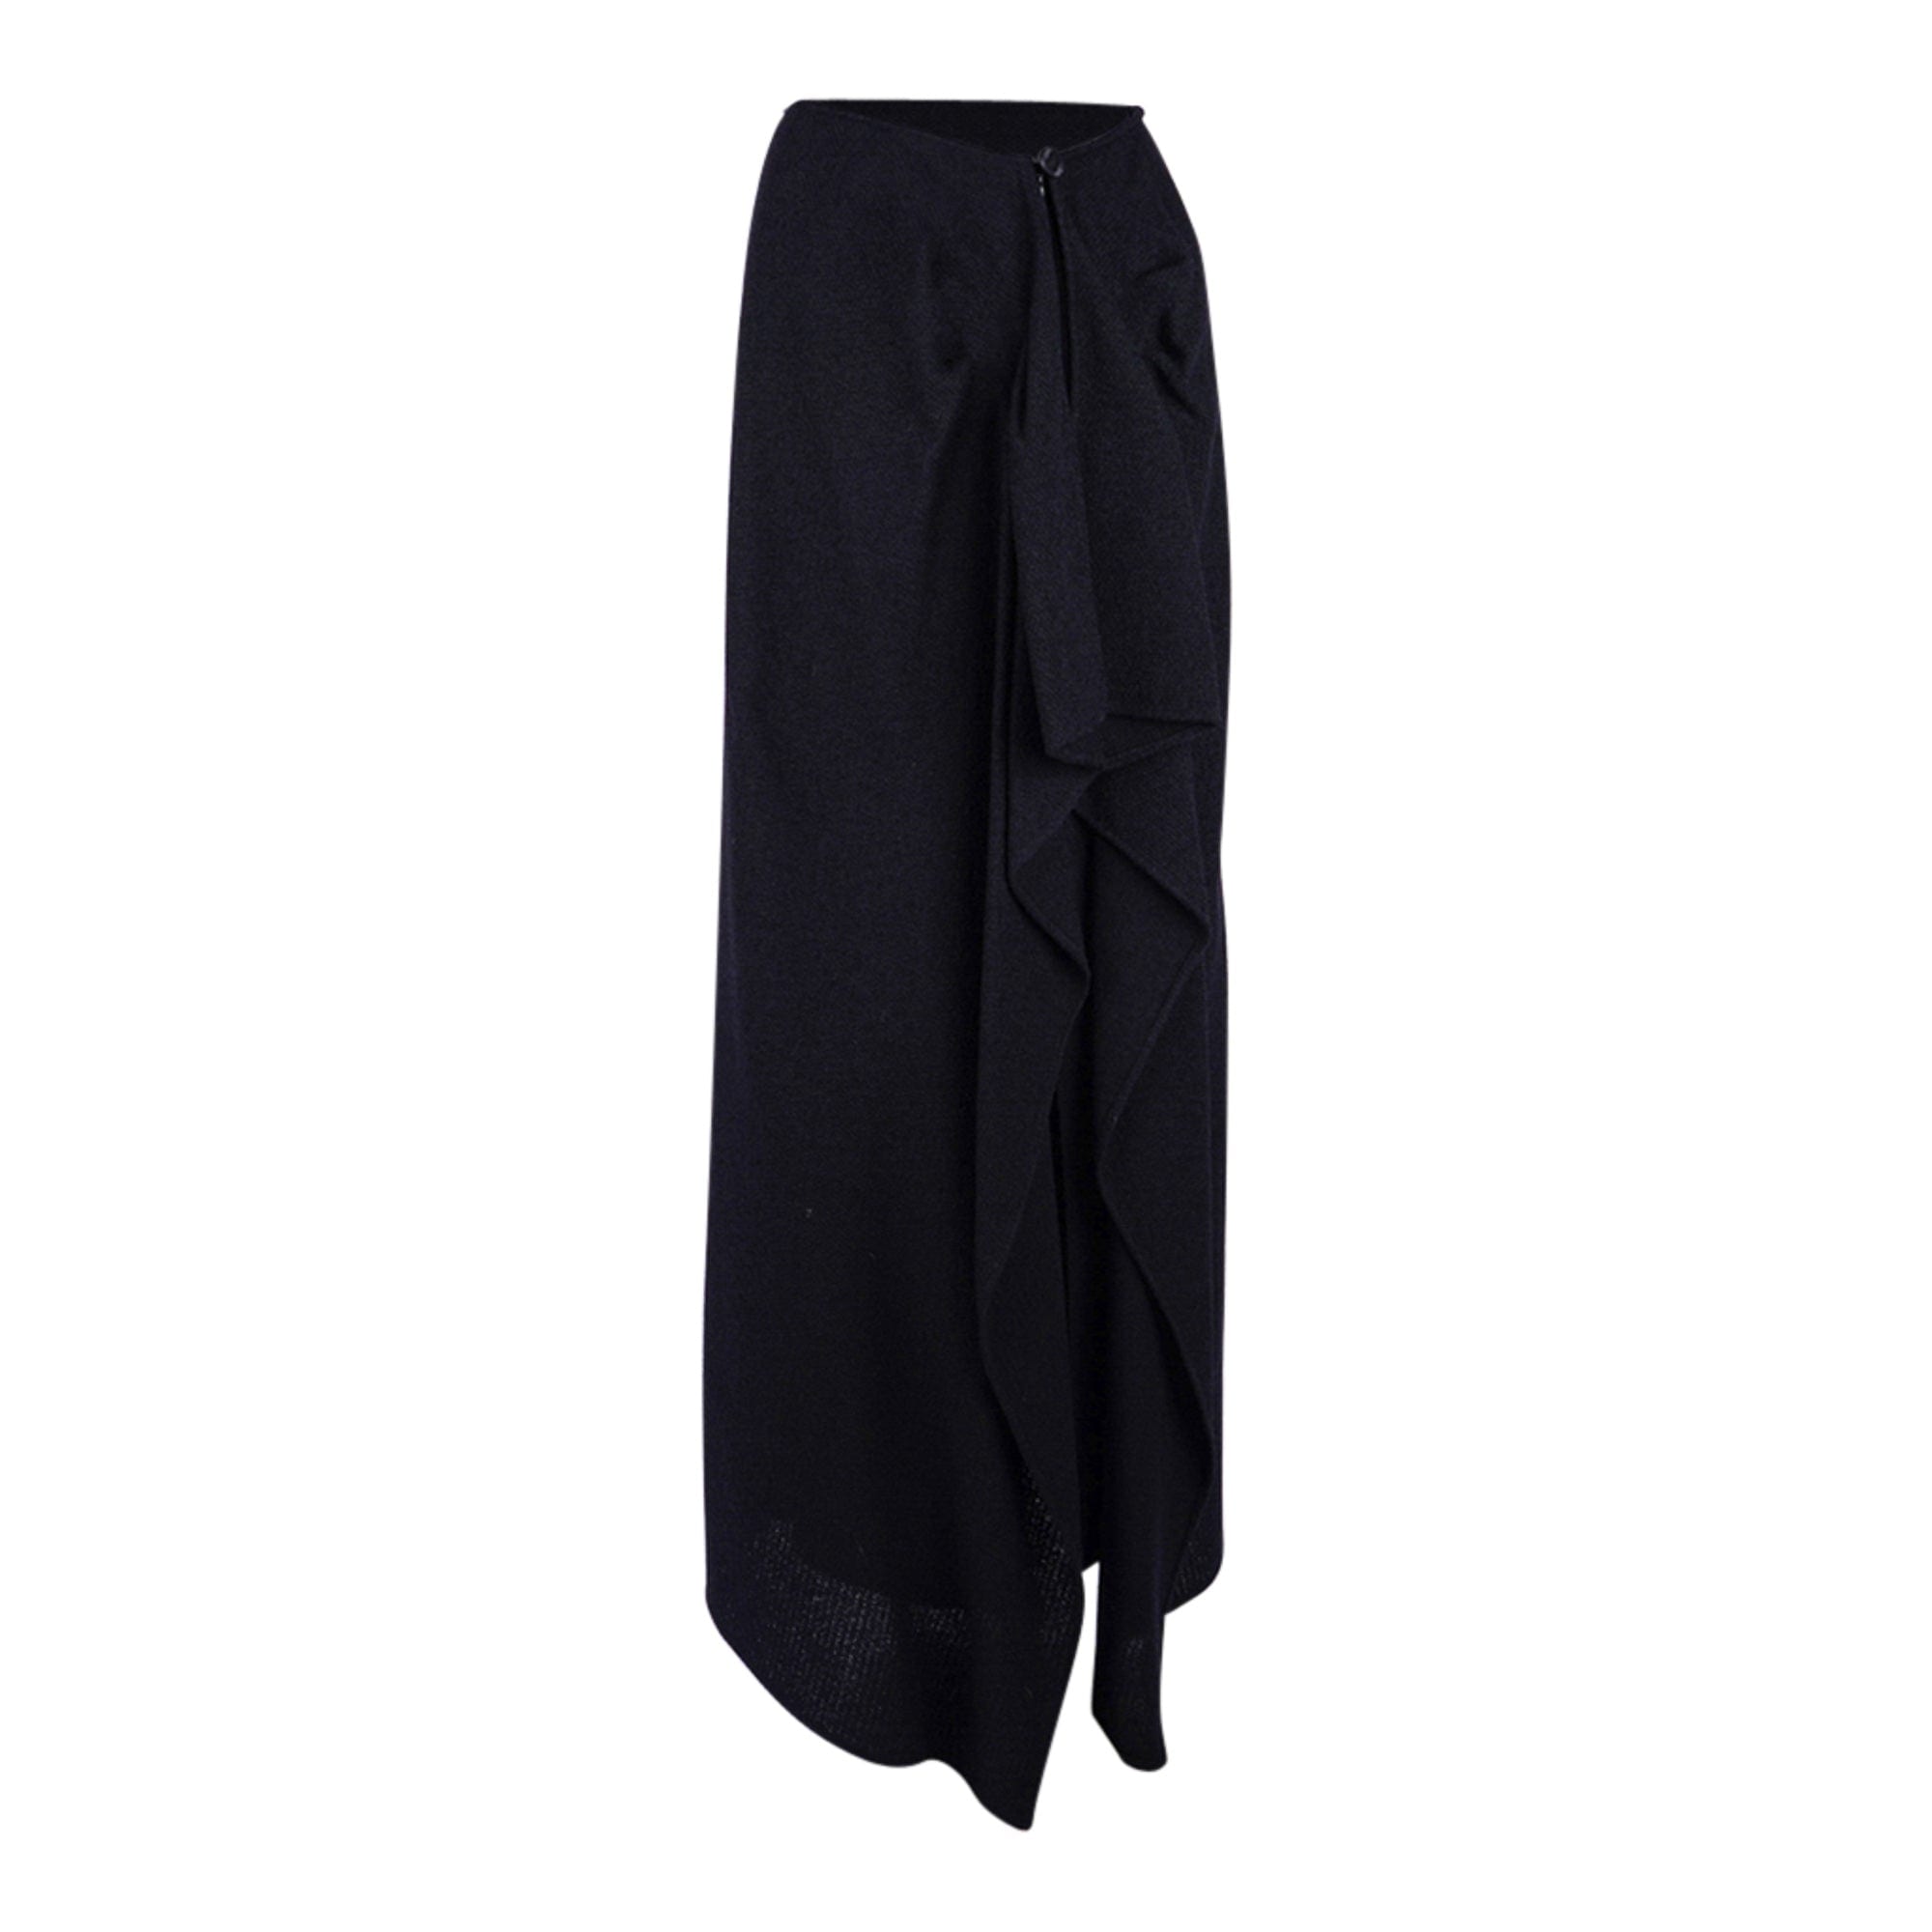 Chanel 98A Skirt Black Long Pencil Draped Rear Detail 36 Fits 4 to  6